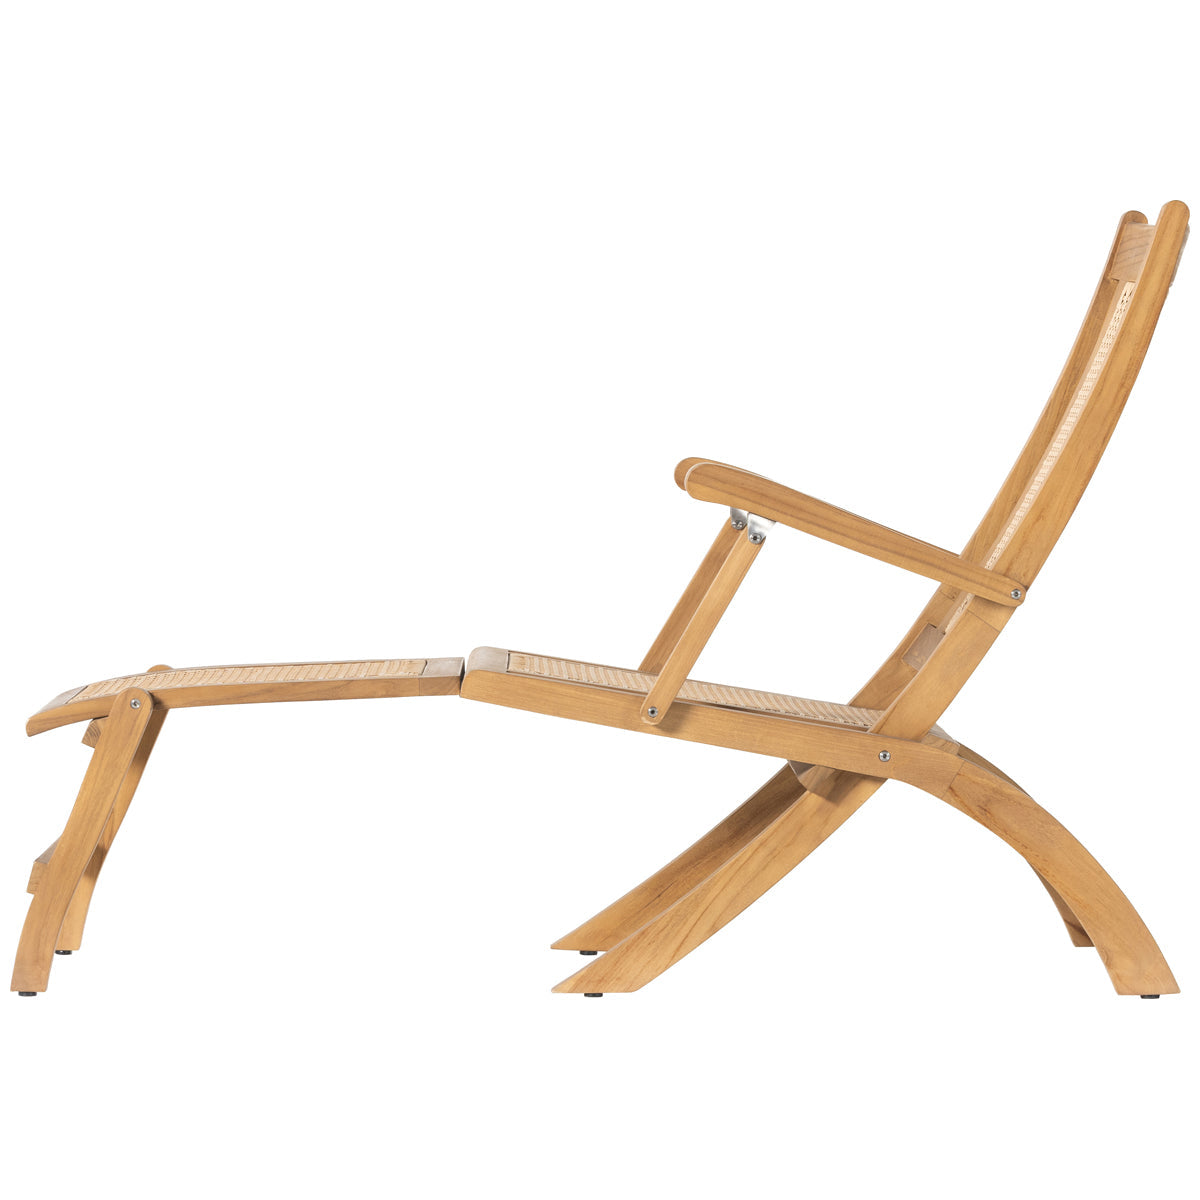 Four Hands Solano Jost Outdoor Chaise Lounge - Natural Teak